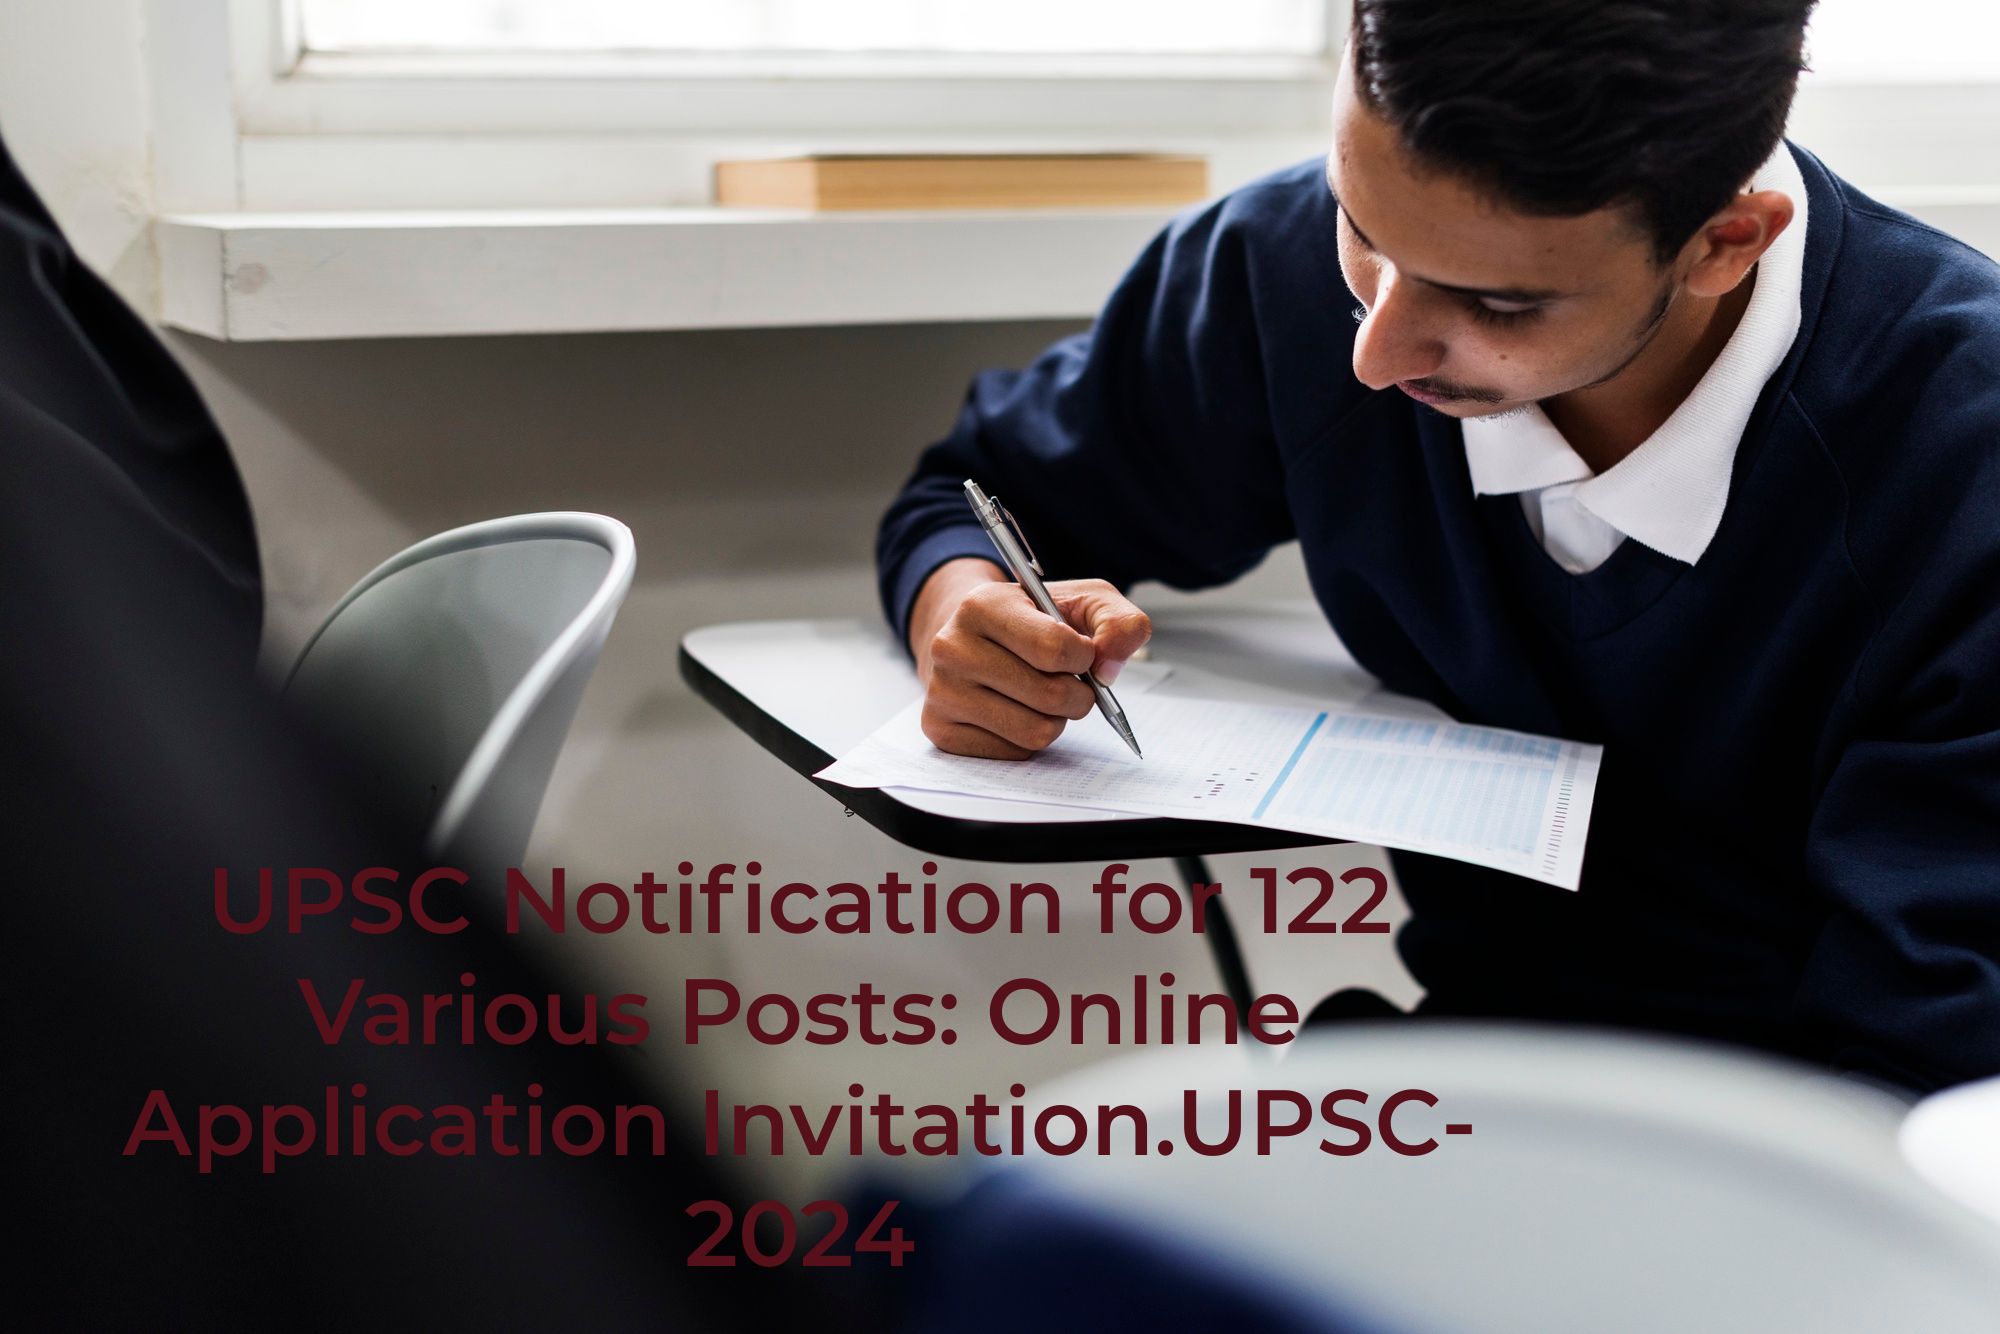 UPSC Notification for 122 Various Posts: Online Application Invitation.UPSC-2024